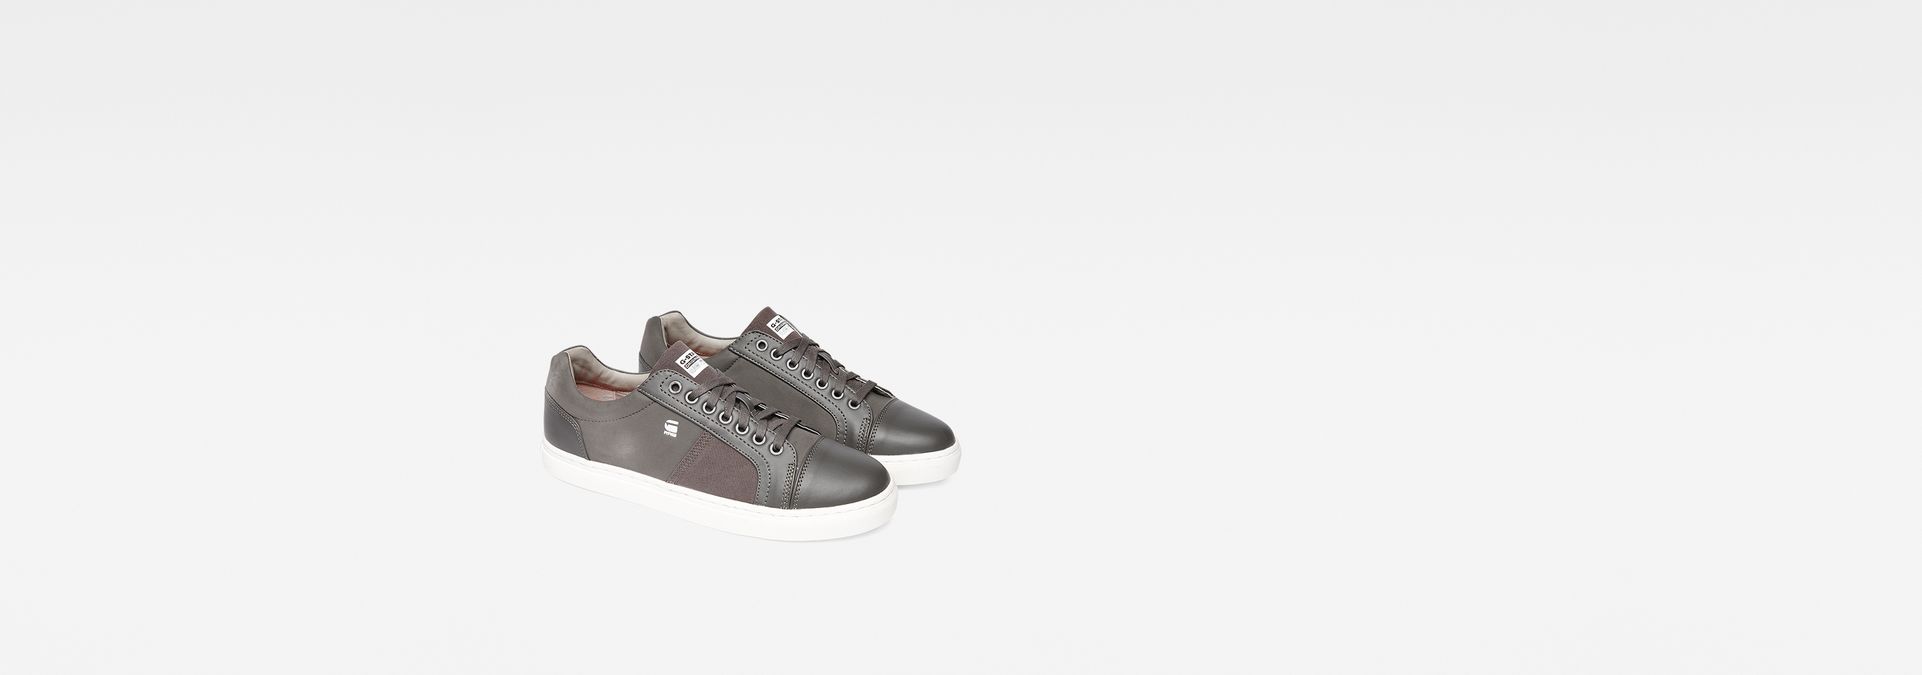 Toublo Sneakers Gs Grey G Star Raw